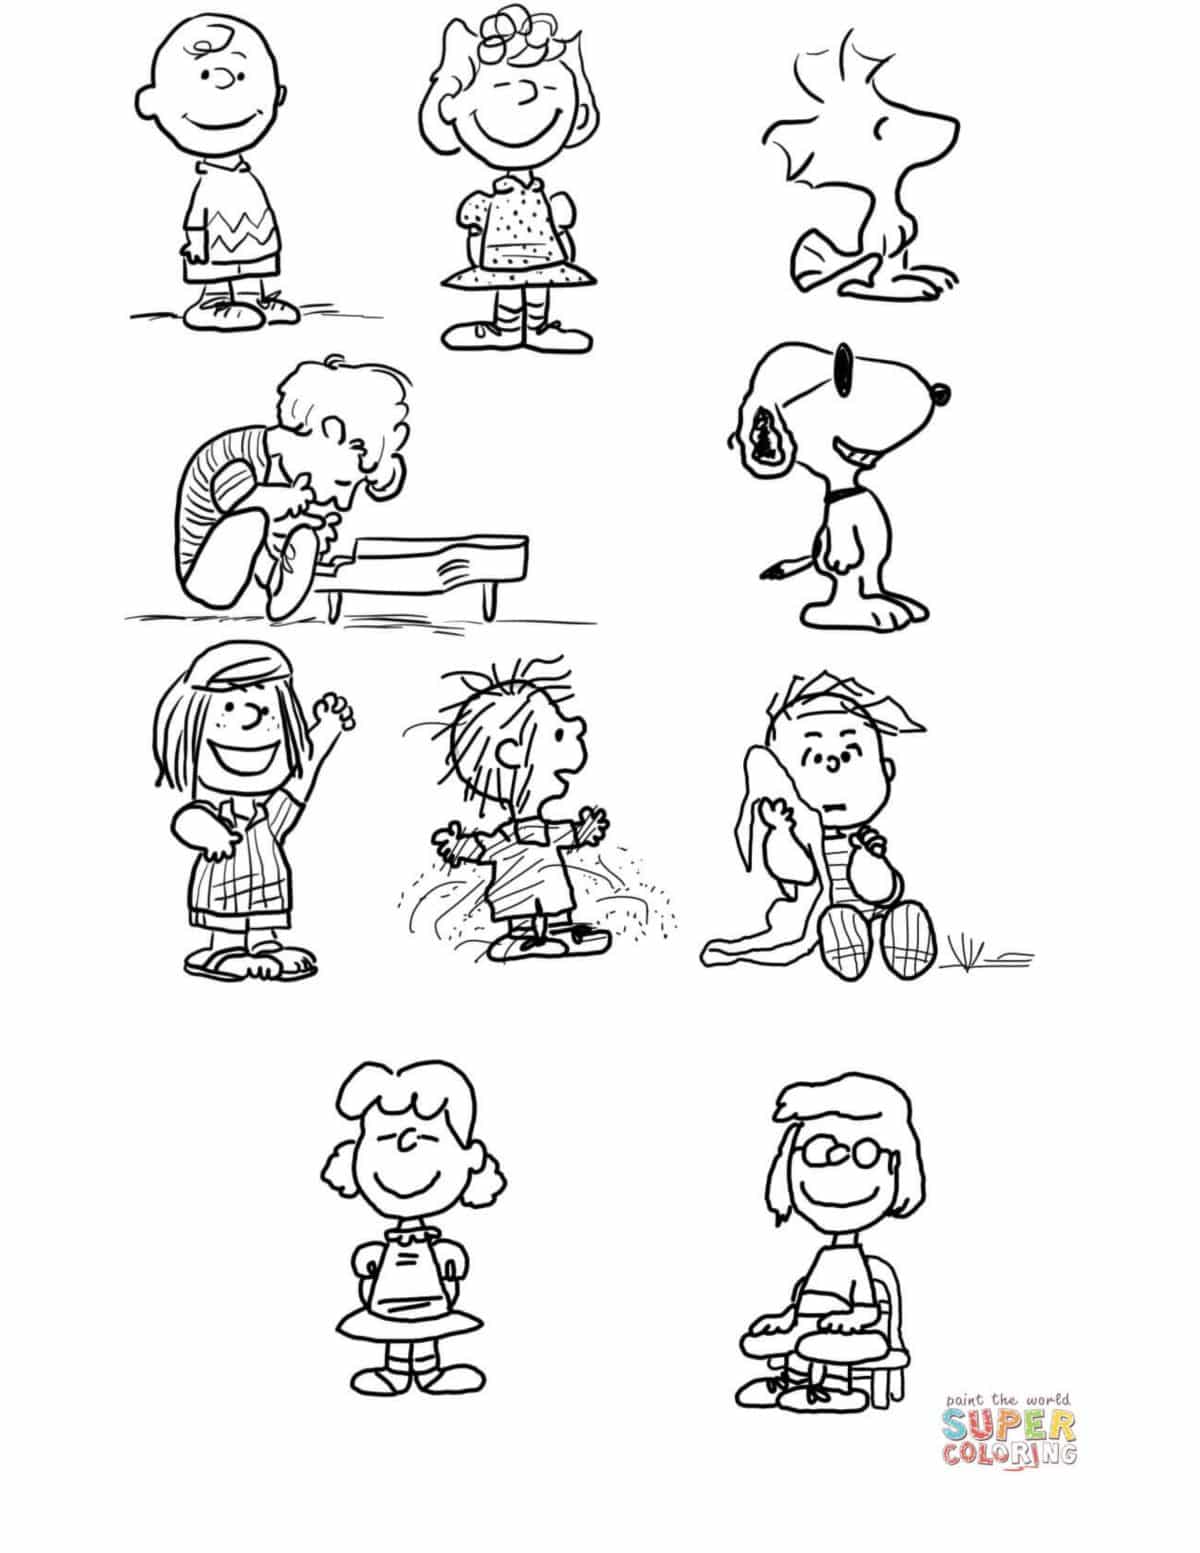 Charlie Brown Characters coloring page Free Printable Coloring Pages